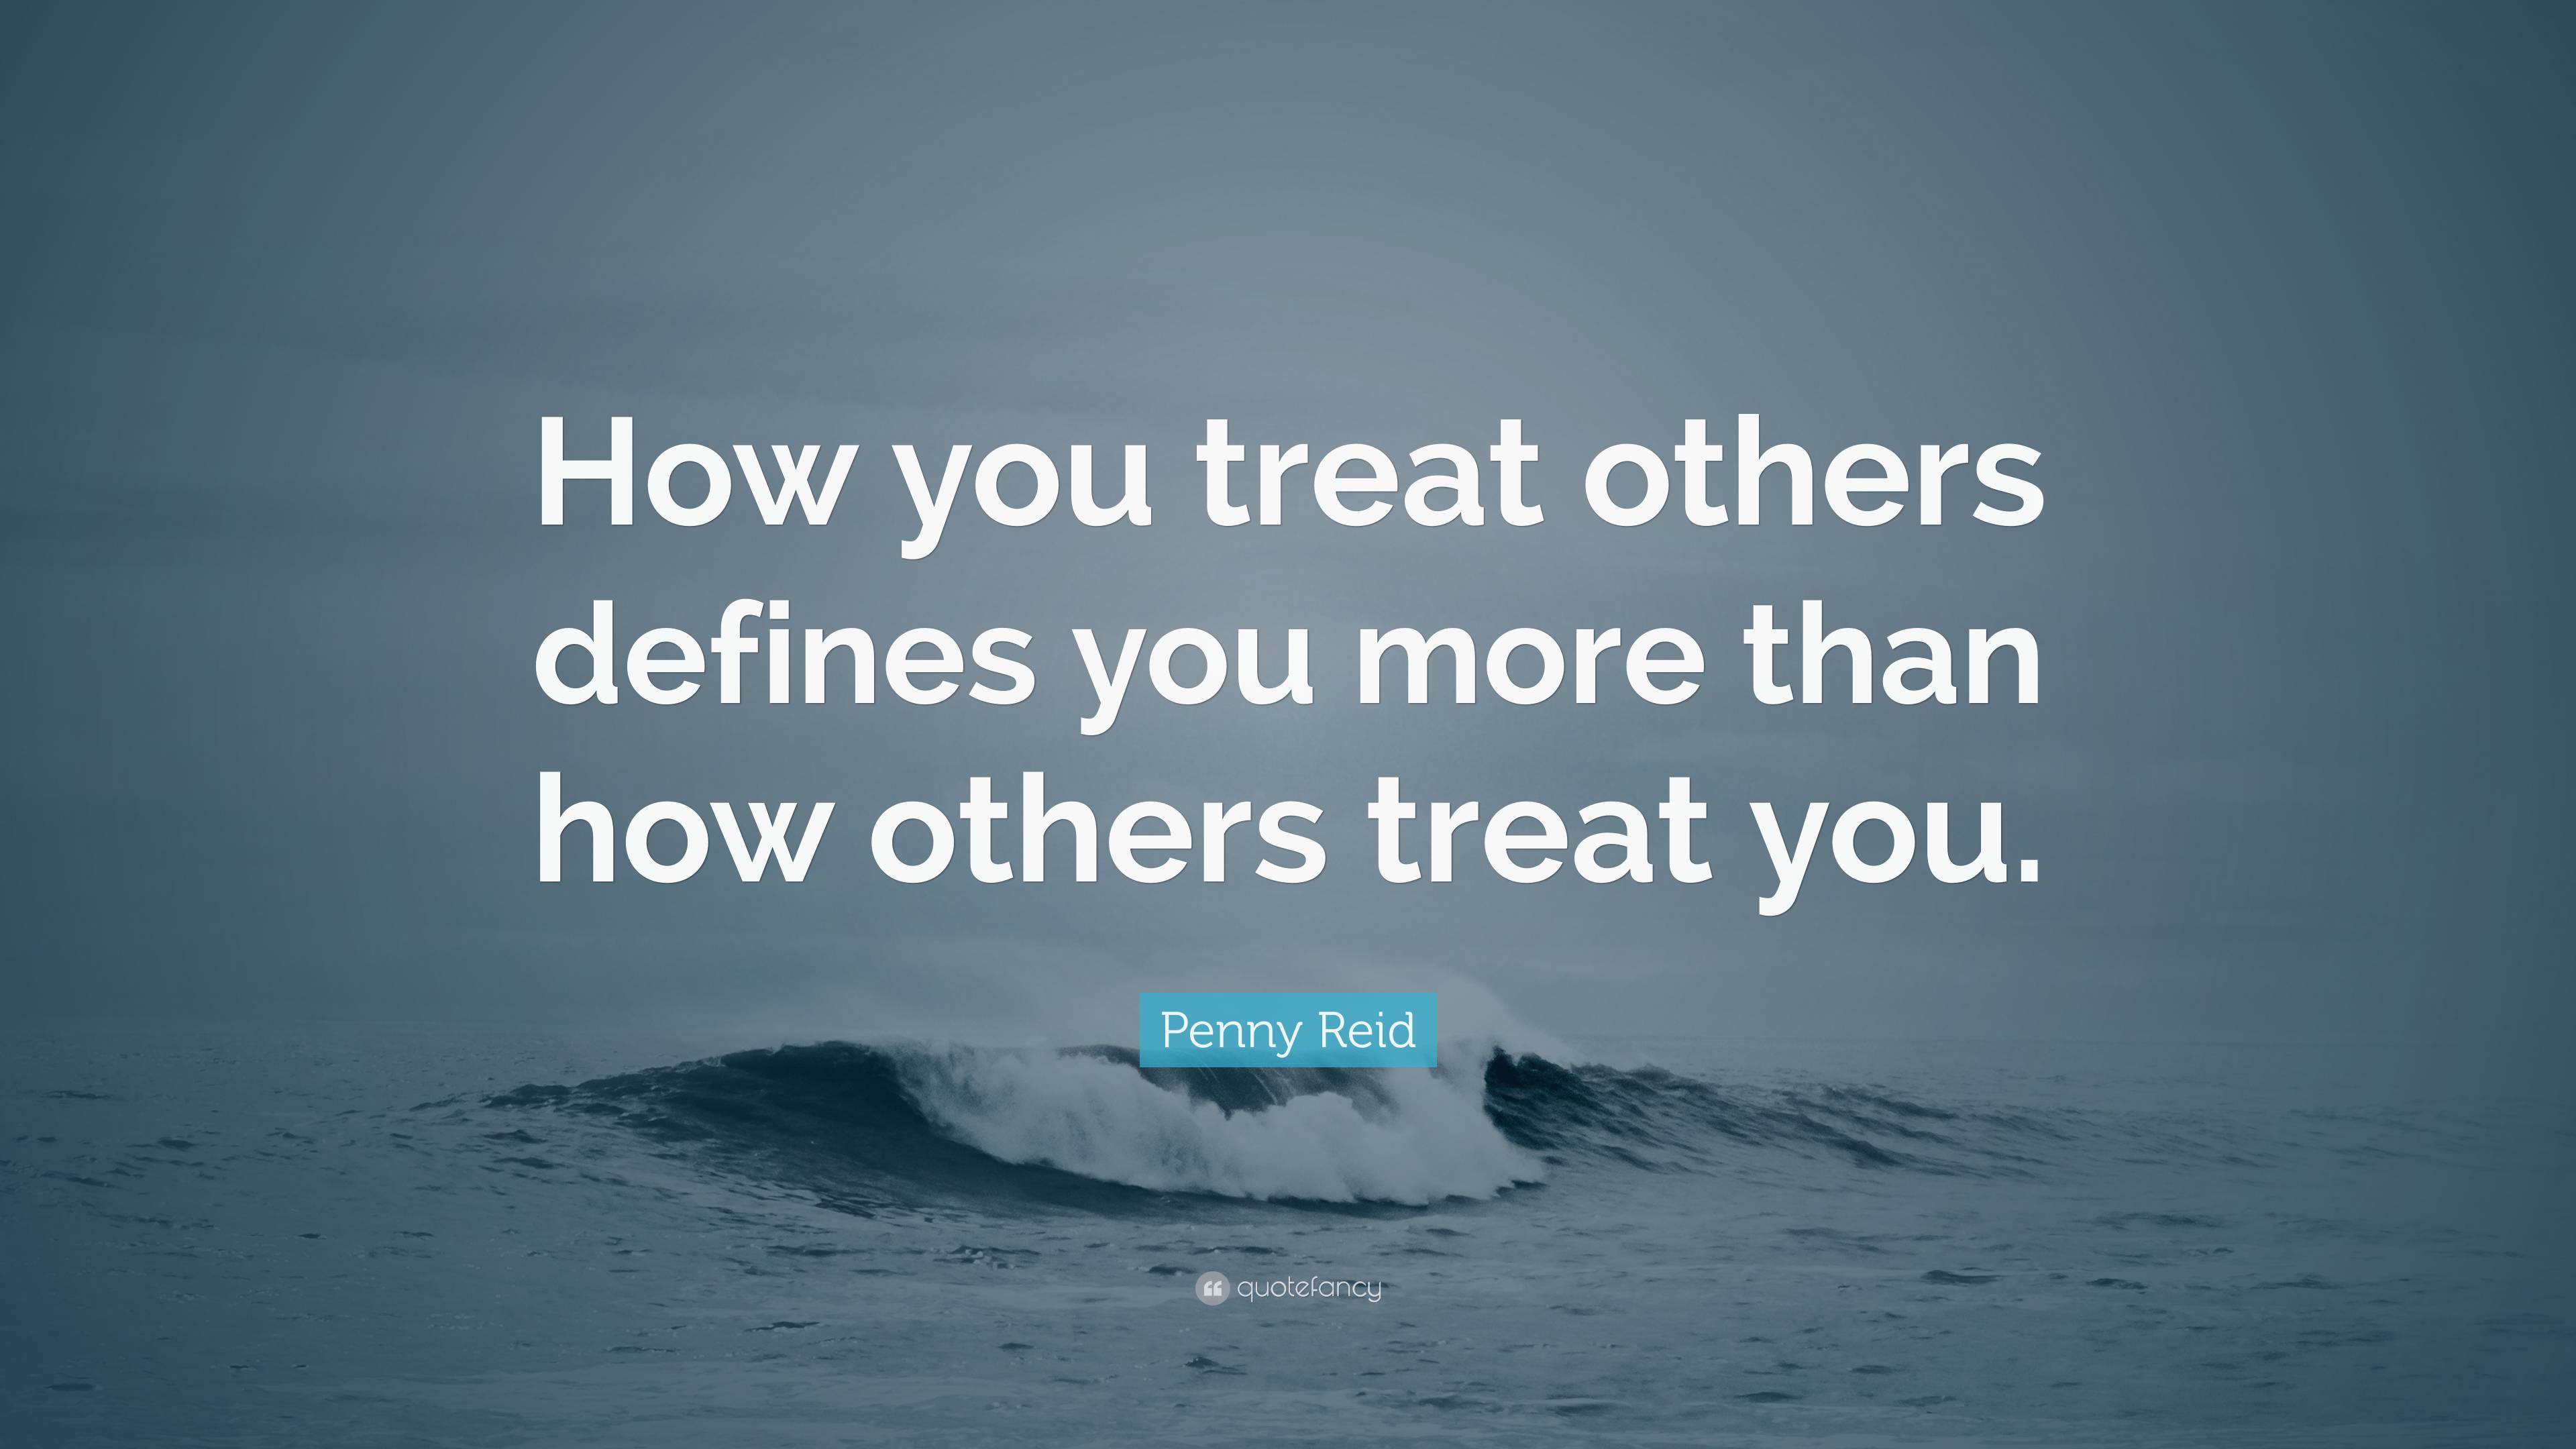 Penny Reid Quote: “How you treat others defines you more than how ...